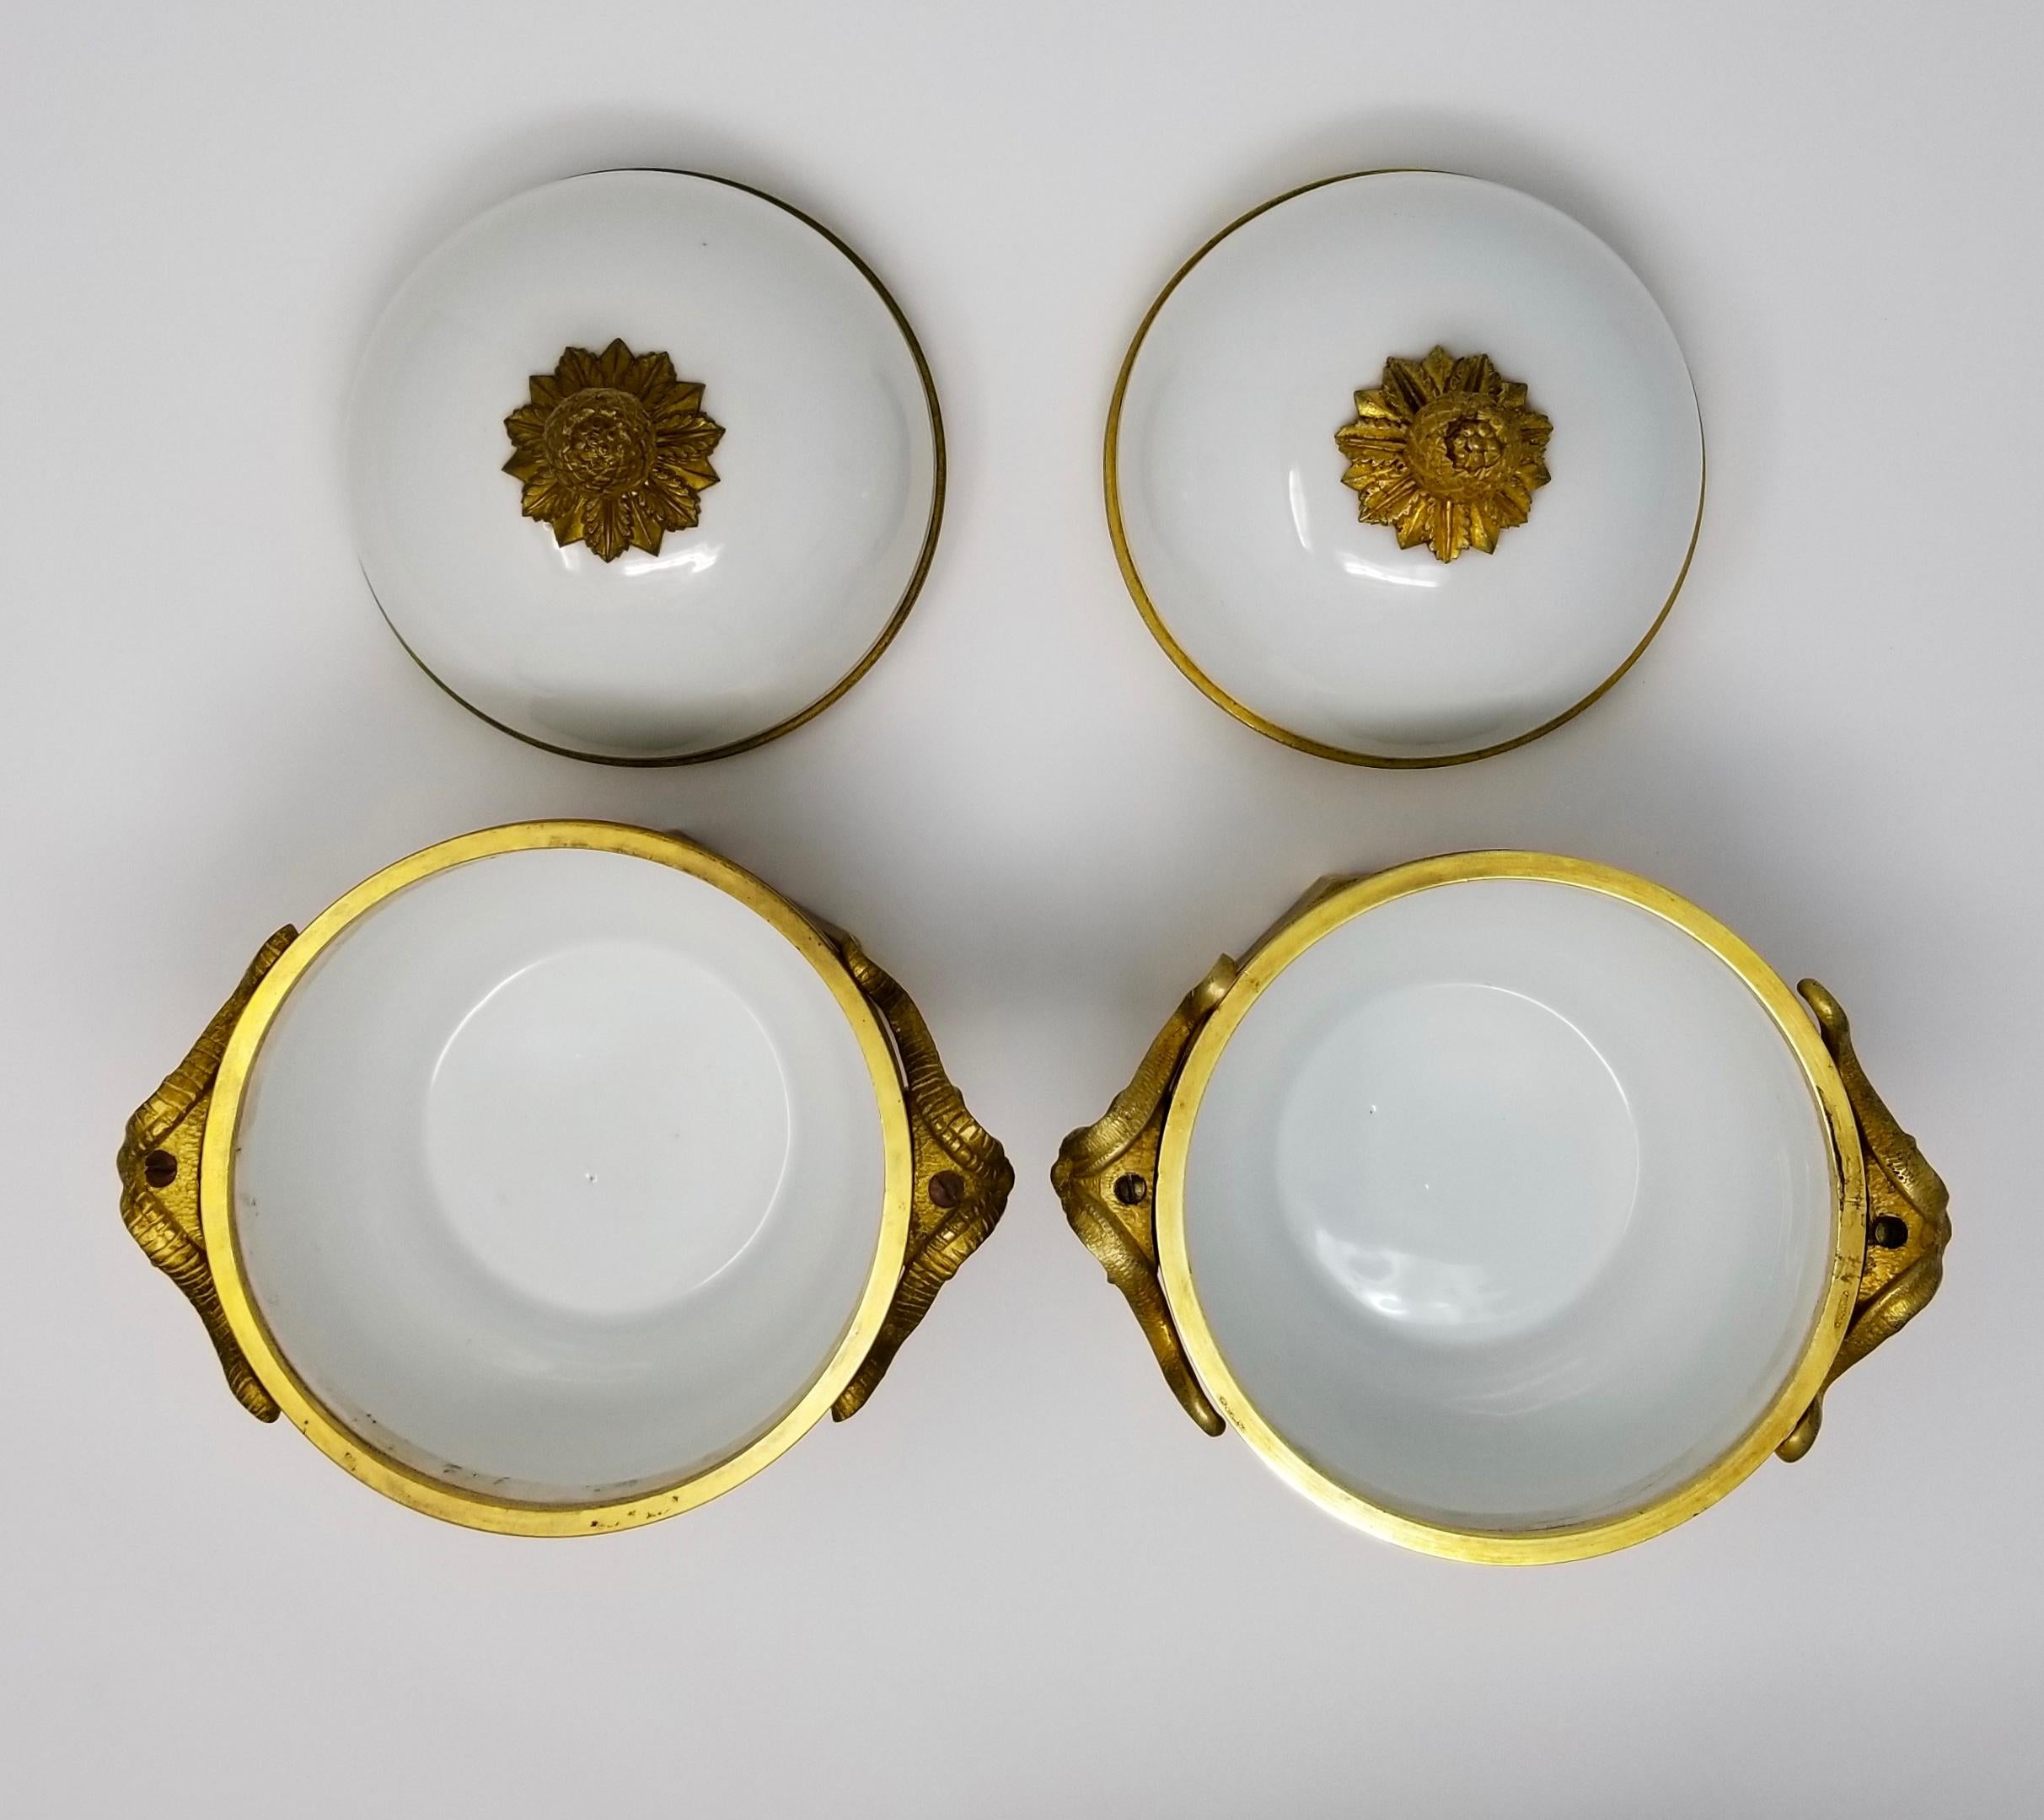 Pair of Louis XVI Ormolu Mounted White Porcelain and Dore Bronze Covered Bowls For Sale 2